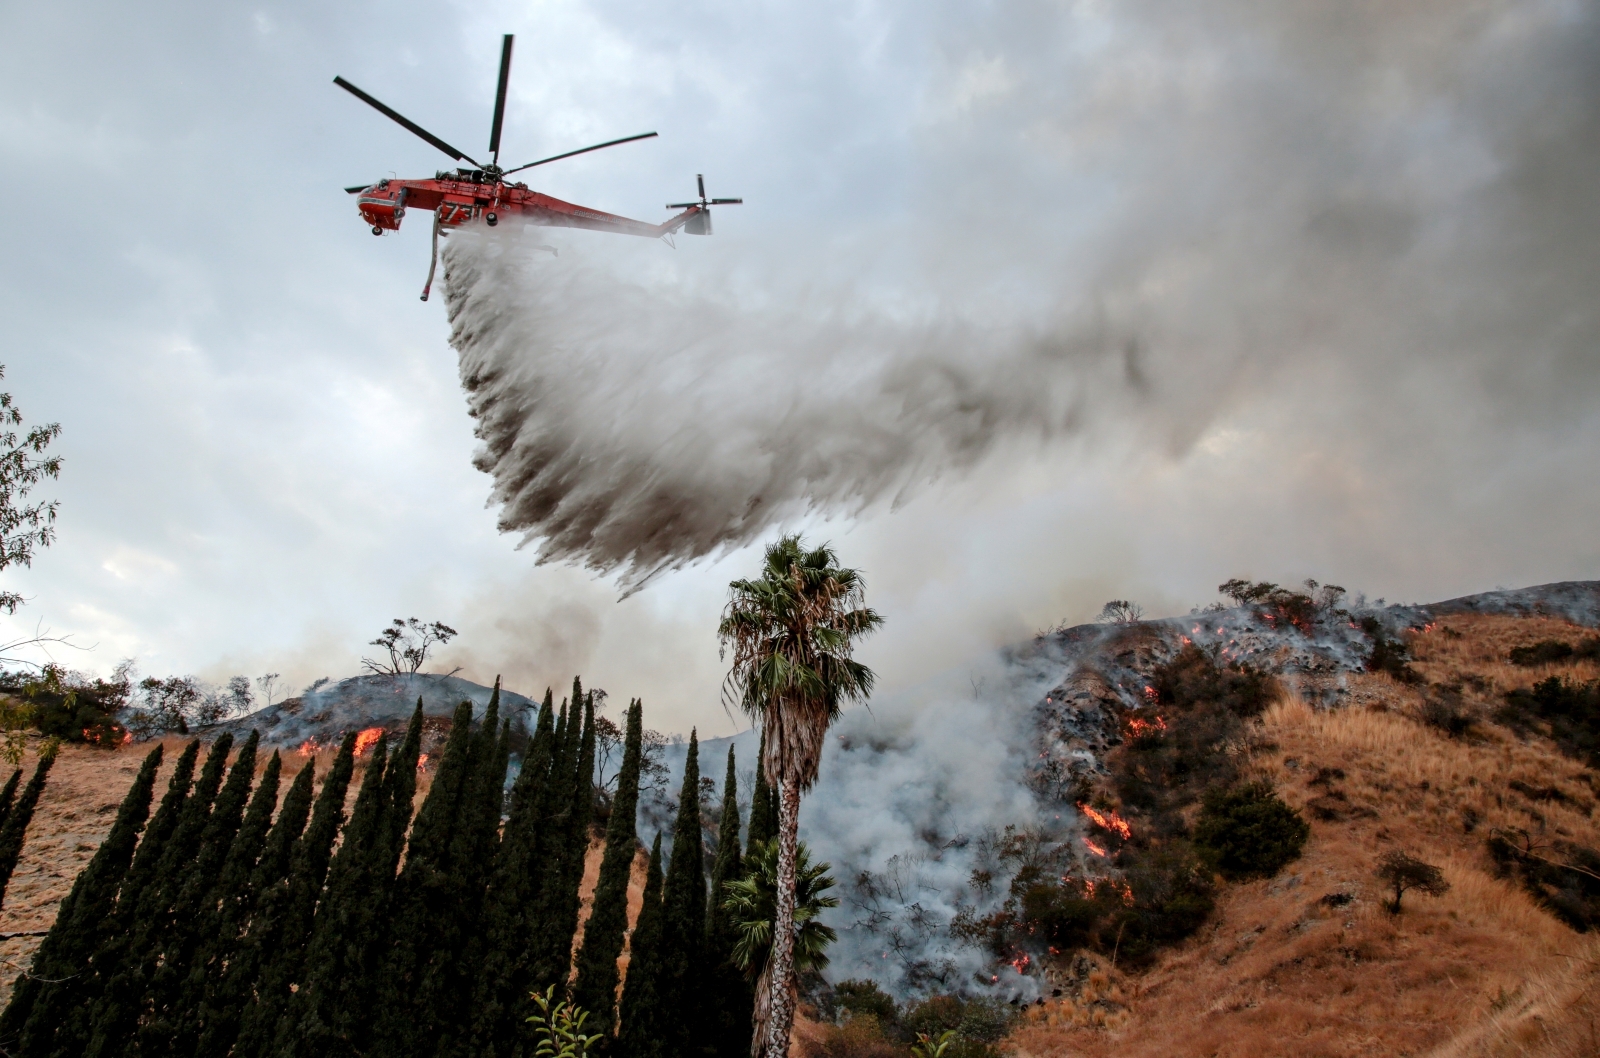 State of emergency declared as Los Angeles fights largest wildfire in